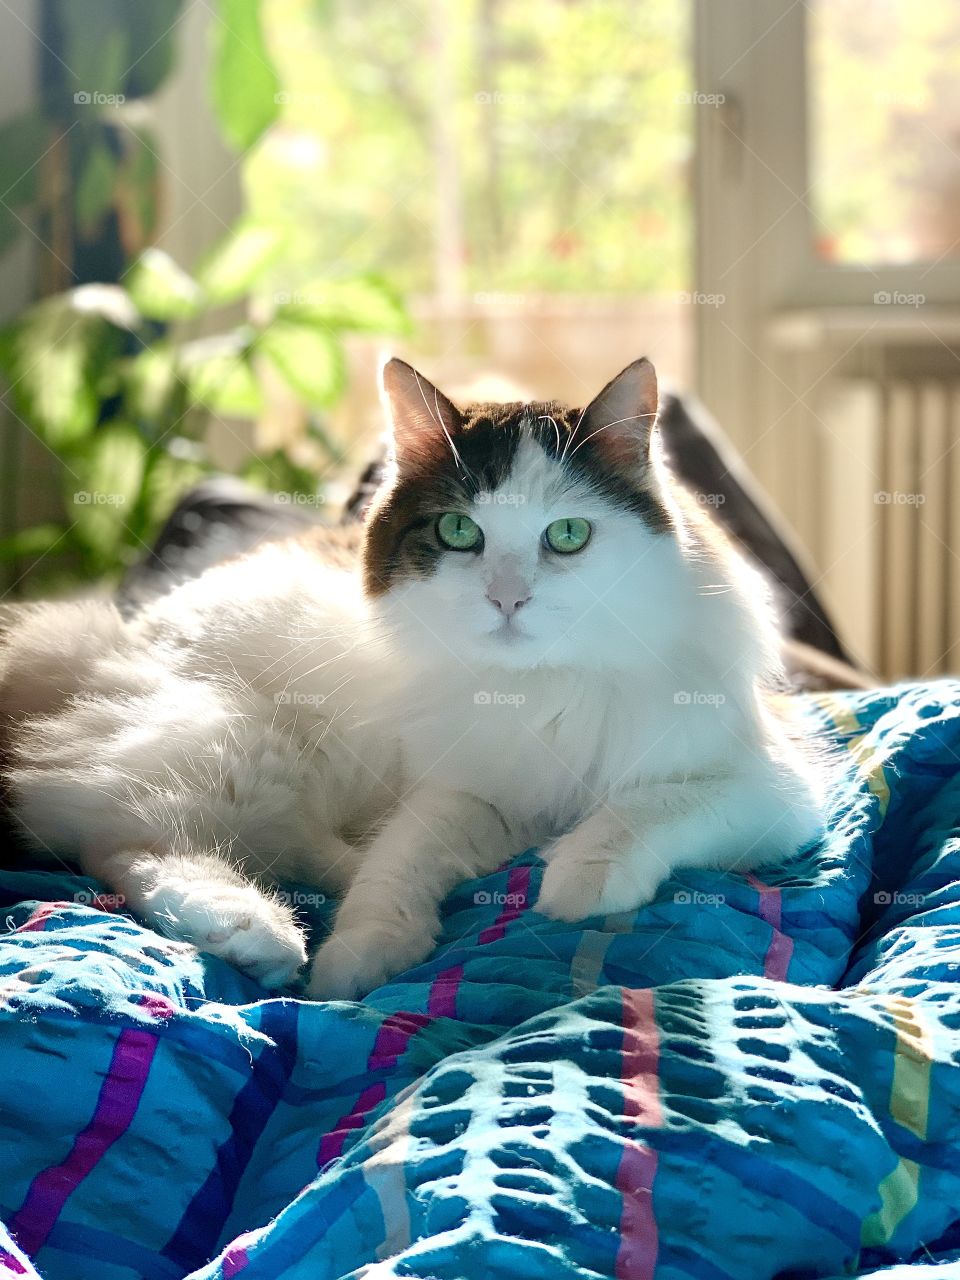 Cat chilling at home in a sunny day on a blue blanket